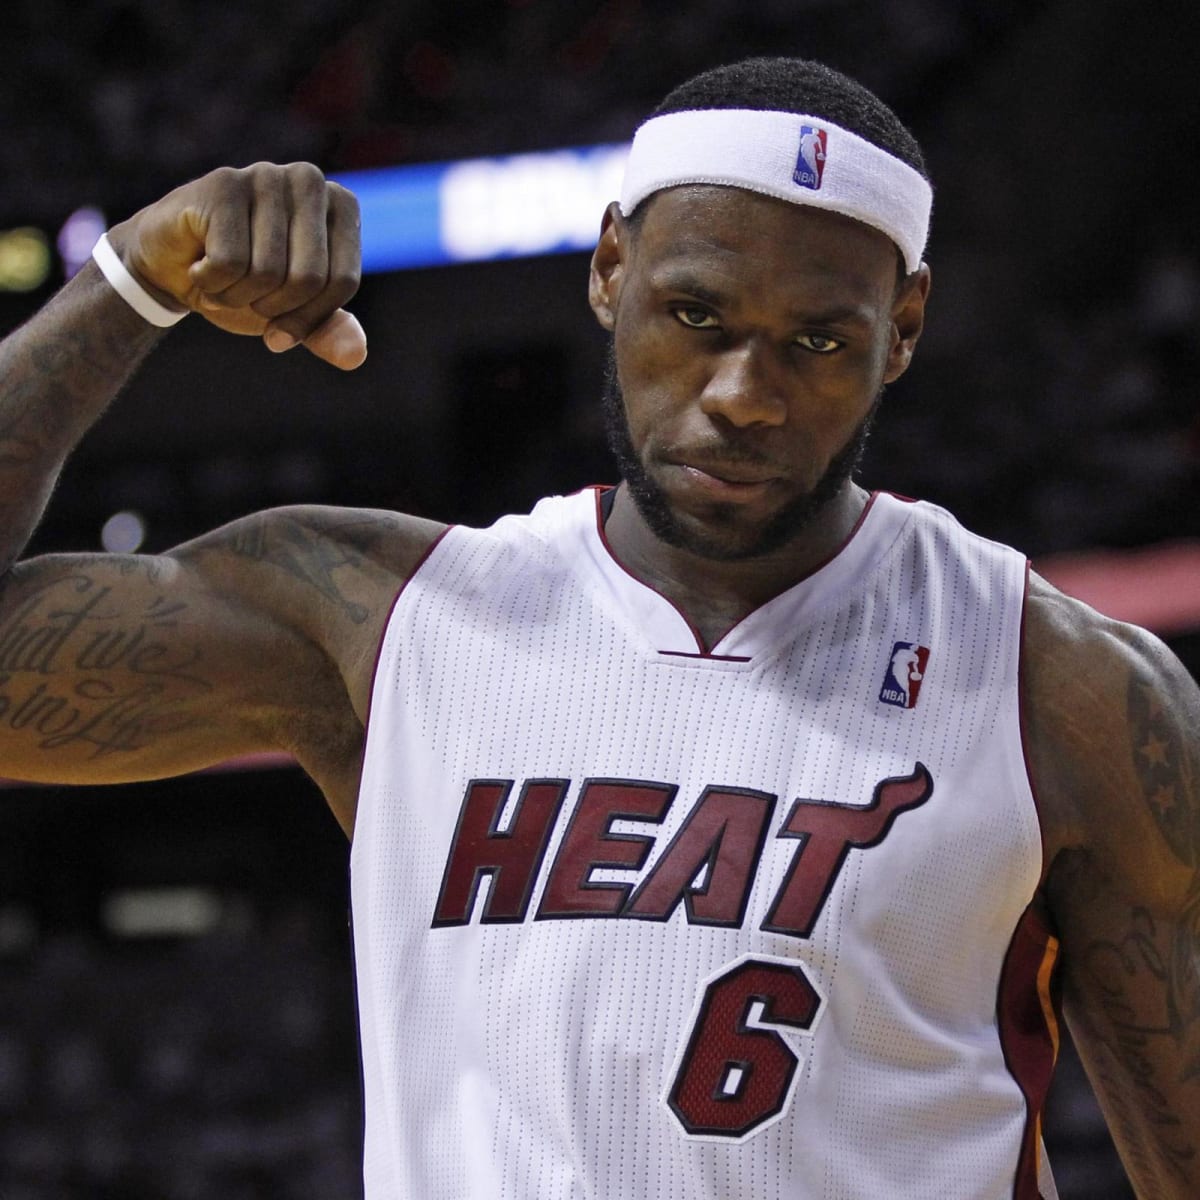 LeBron James to switch jersey number from 23 to 6